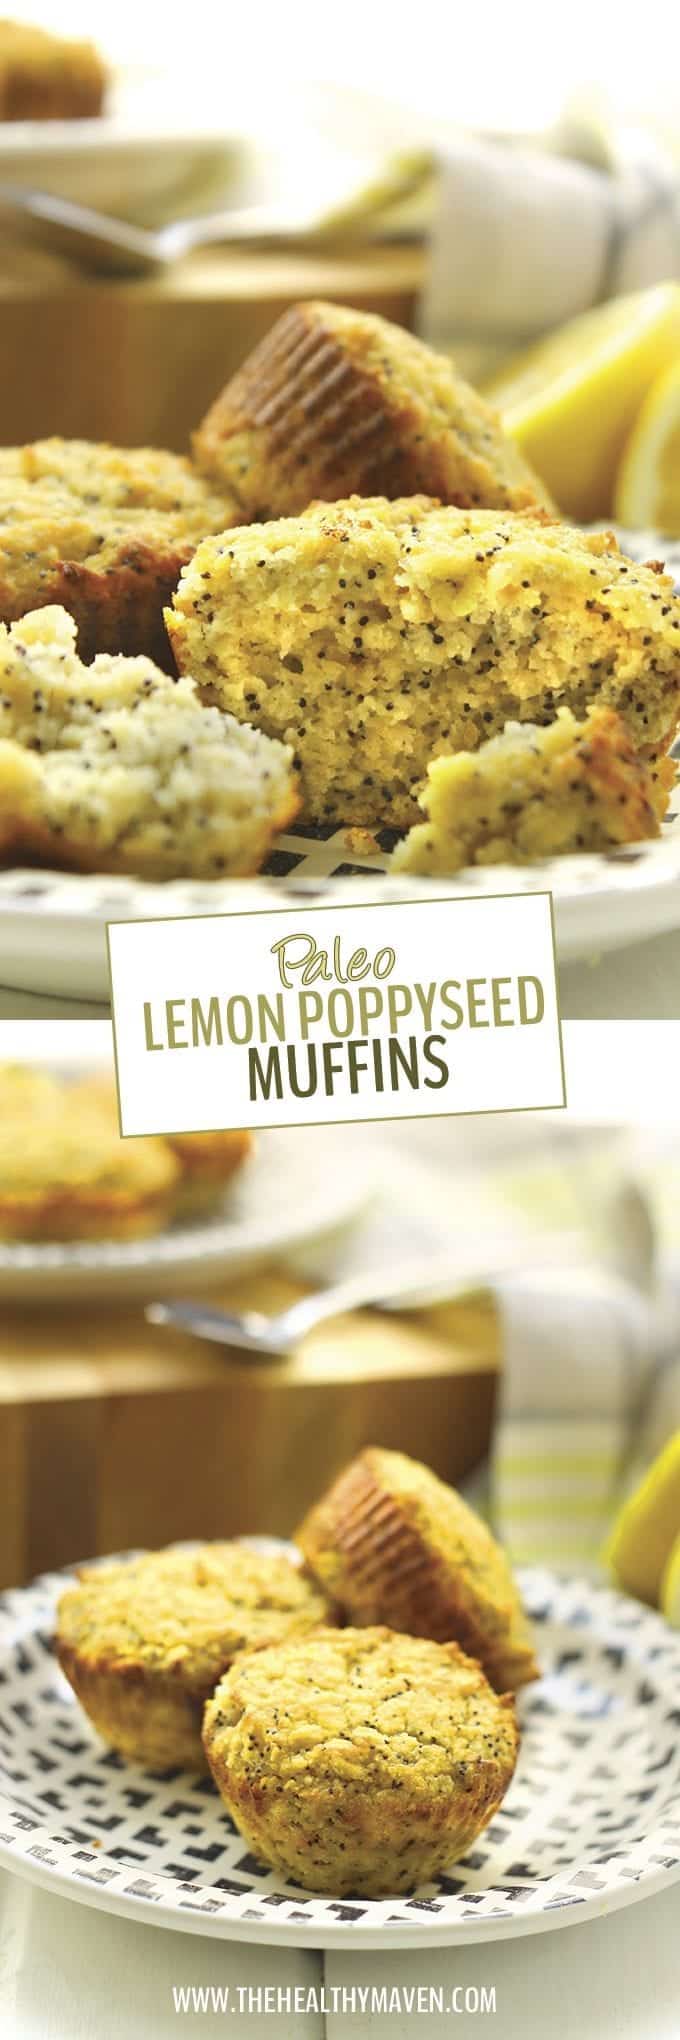 These Paleo Lemon Poppyseed Muffins are packed-full of flavor and nutrition but are completely grain and oil free. They will quickly become your new favorite Spring treat for healthy snacking on the go.